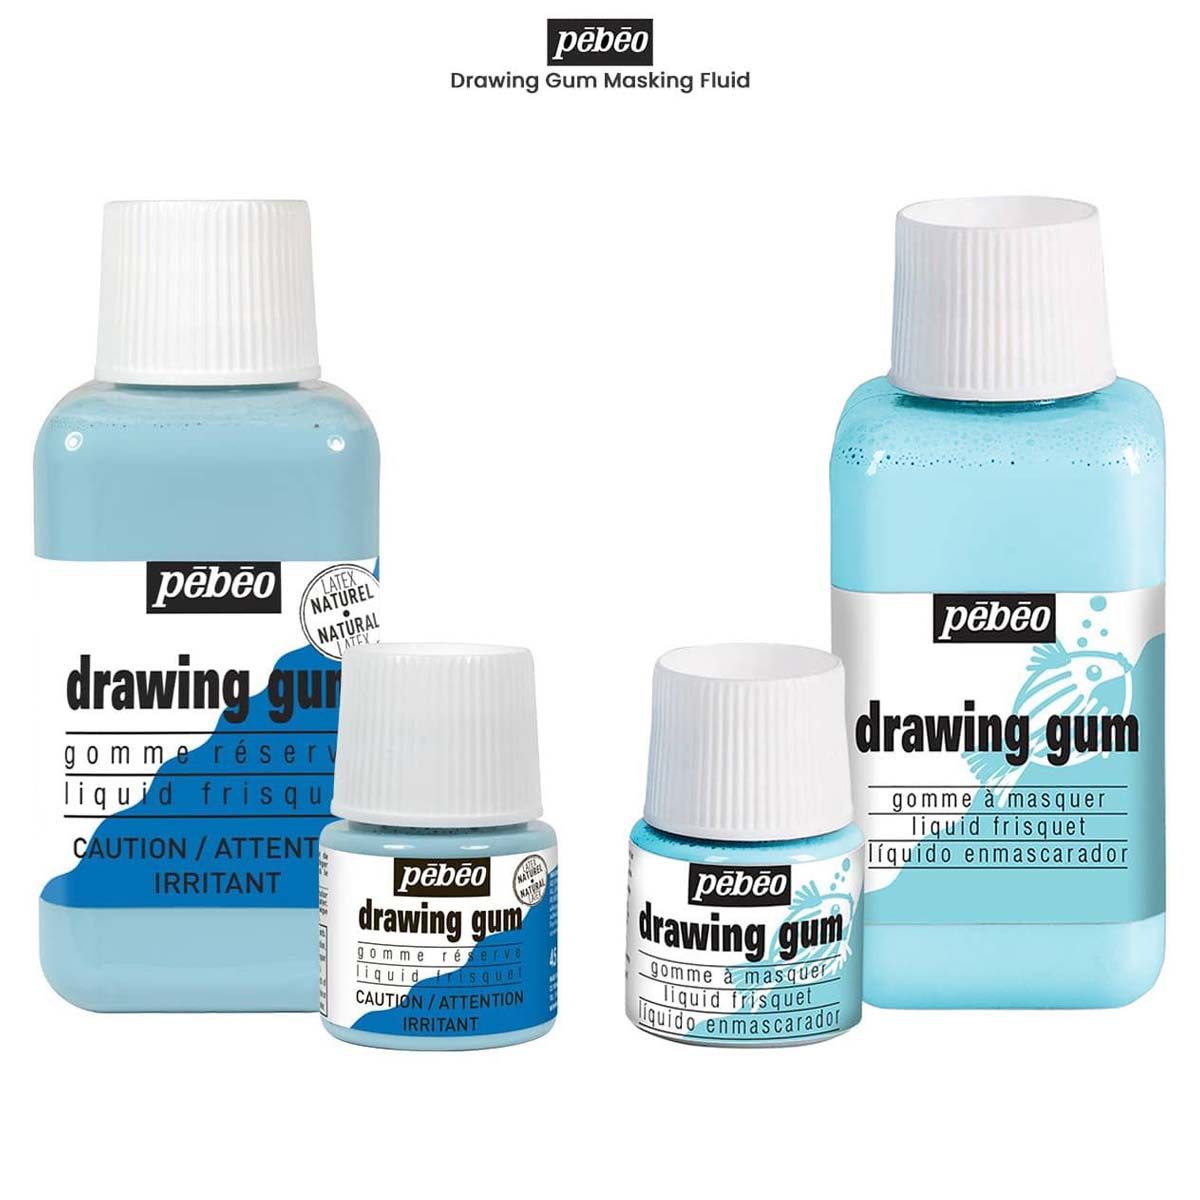 Pebeo Drawing Gum Made in France - Masking Fluid for Watercolor Painting  and Various Art Projects - Bundled with Moshify Applicator Brush Set